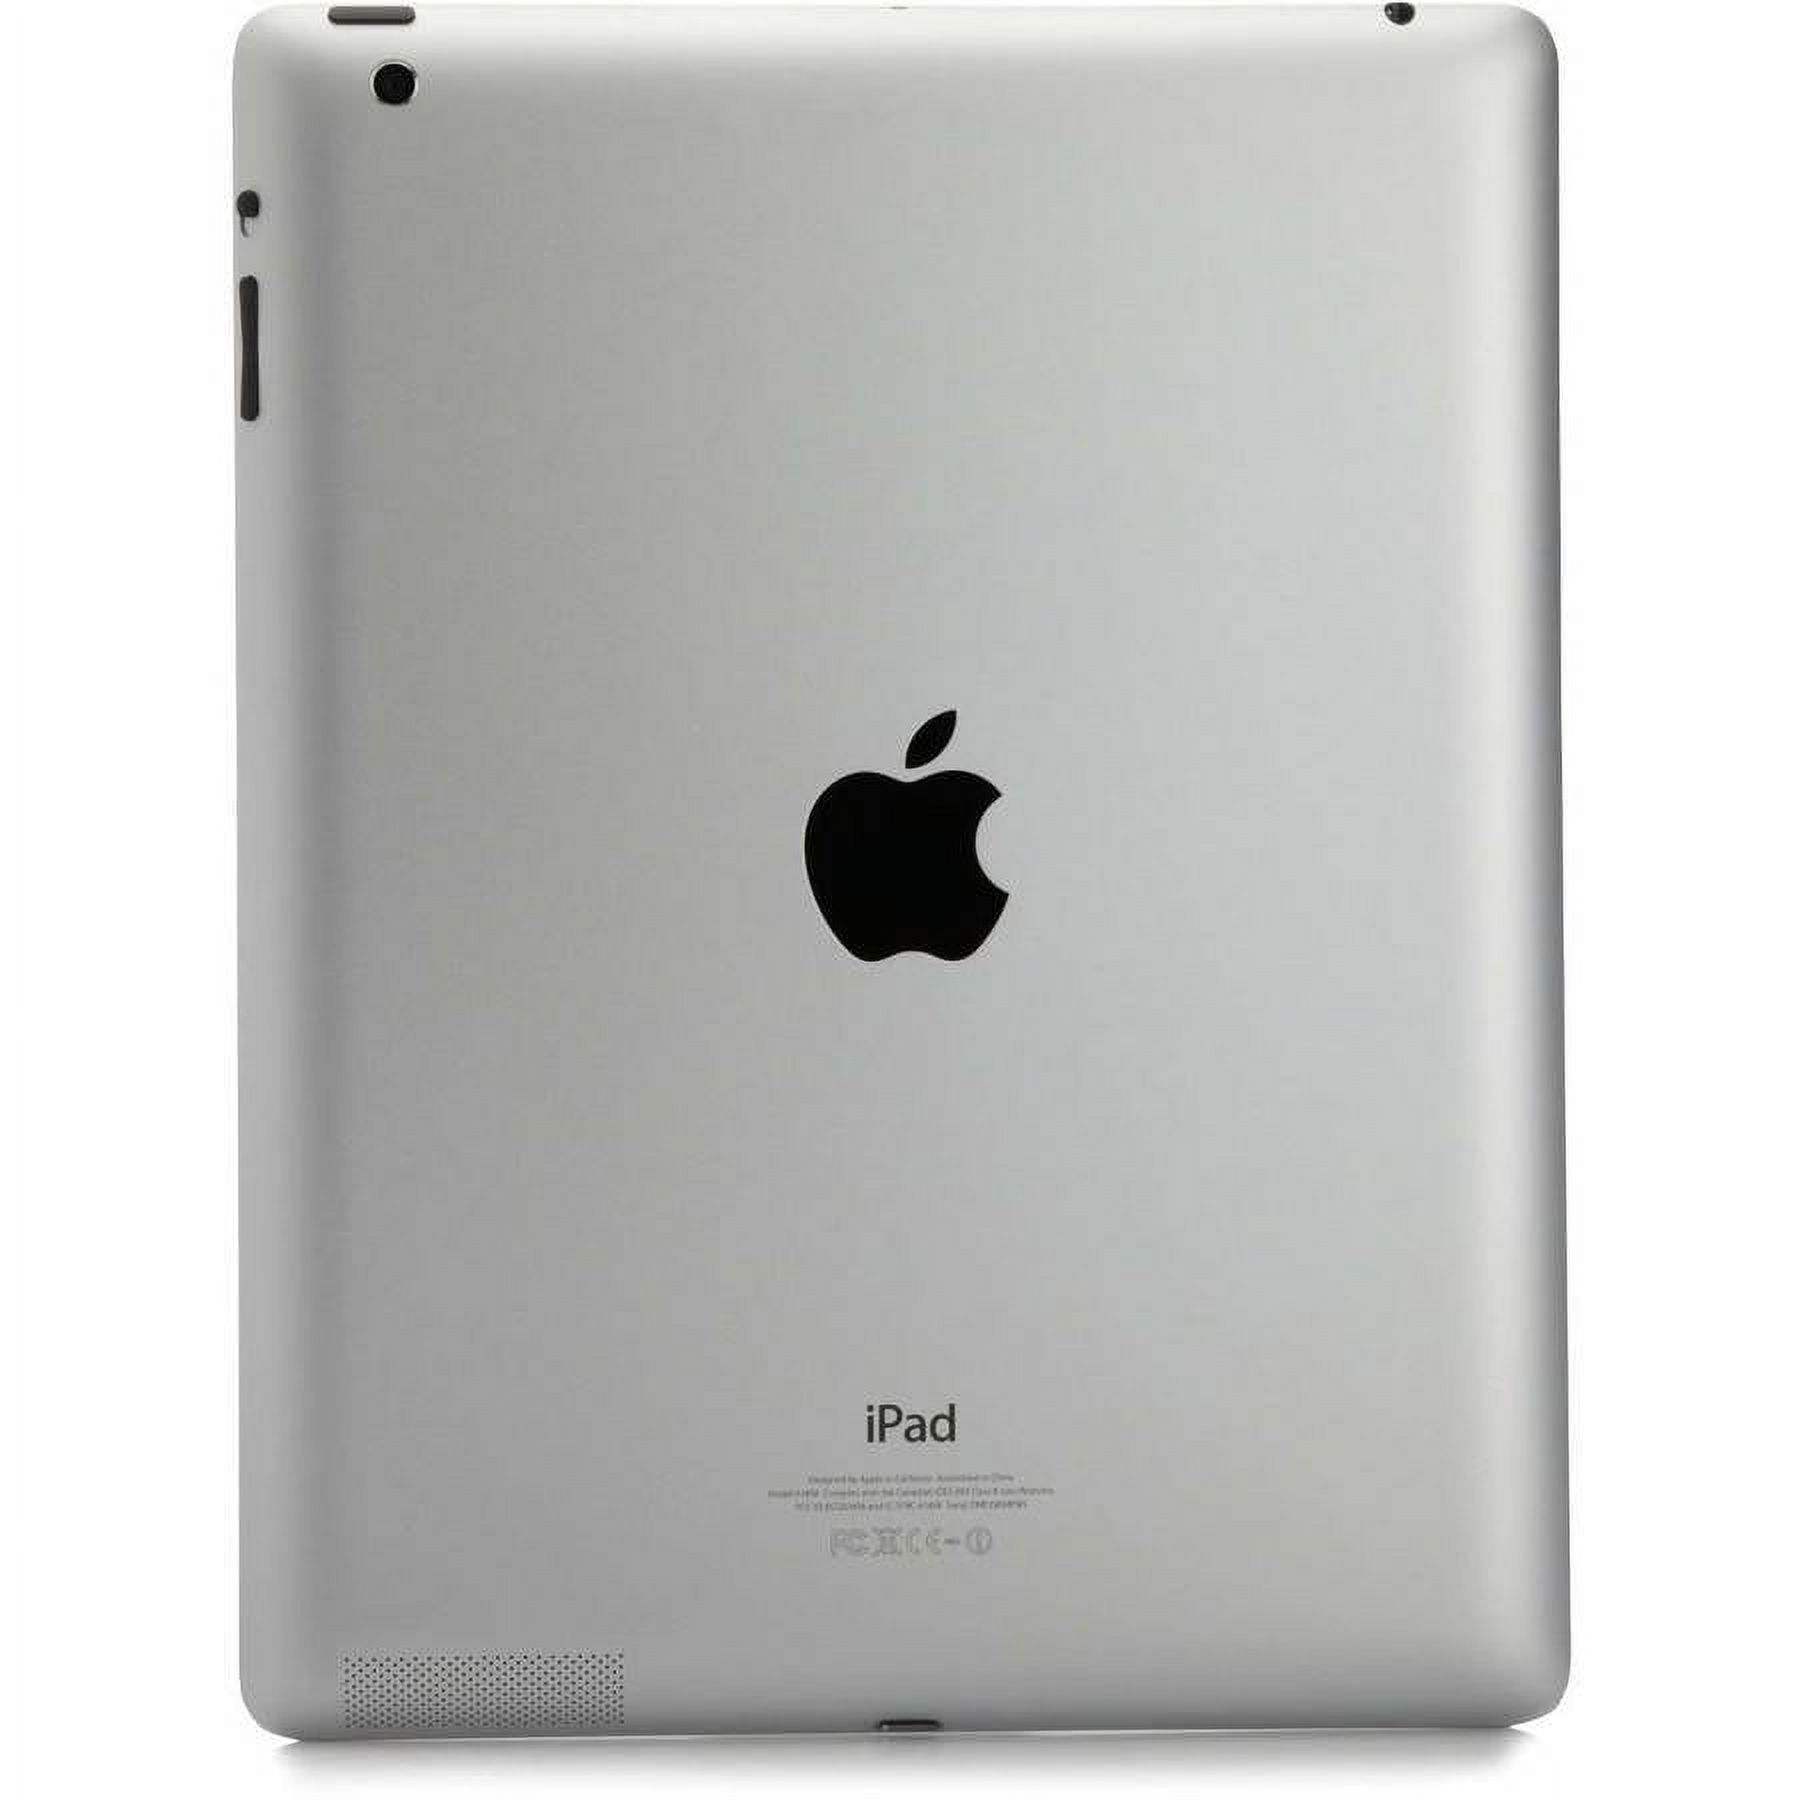 Restored Apple iPad 2nd Gen 16GB White Cellular AT&T MC982LL/A (Refurbished) - image 5 of 5